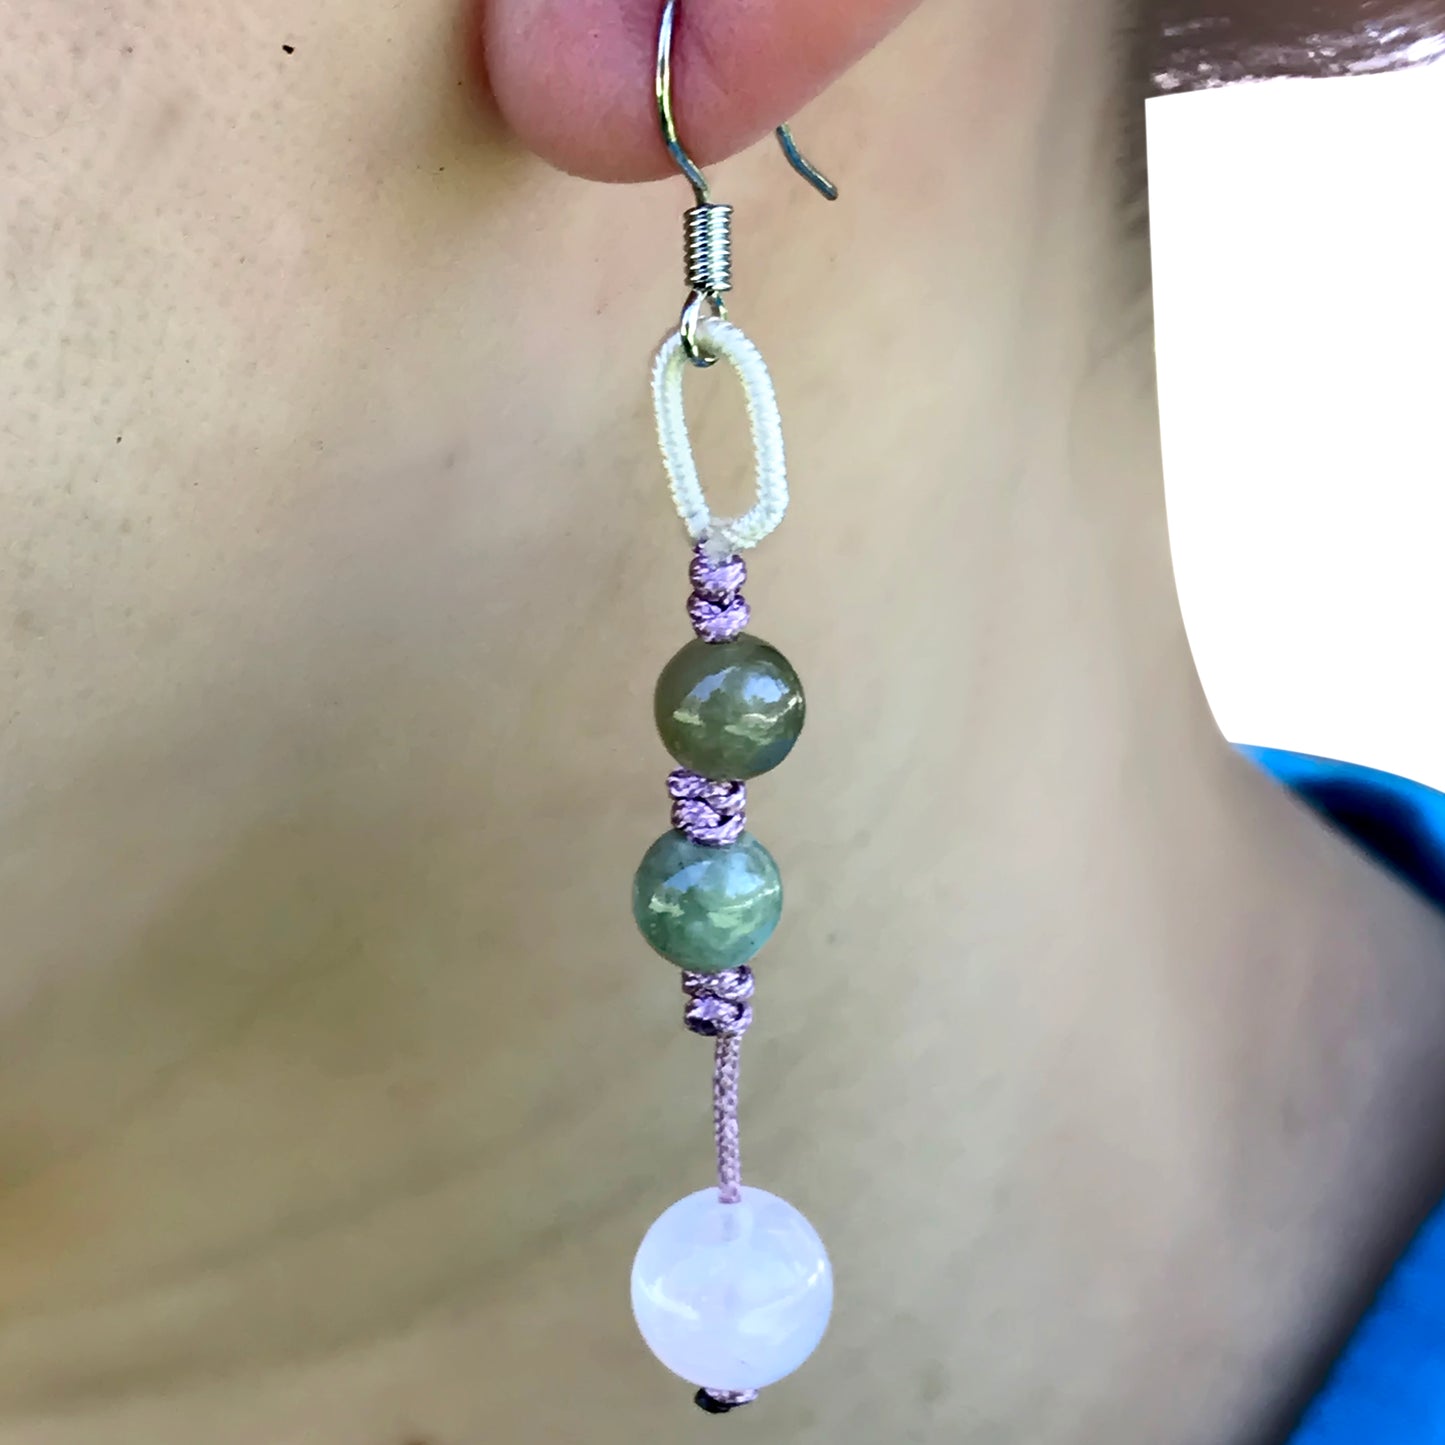 Add a Little Color to Your Look with Playful Beads Rose Quartz Earrings made with Lavender Cord